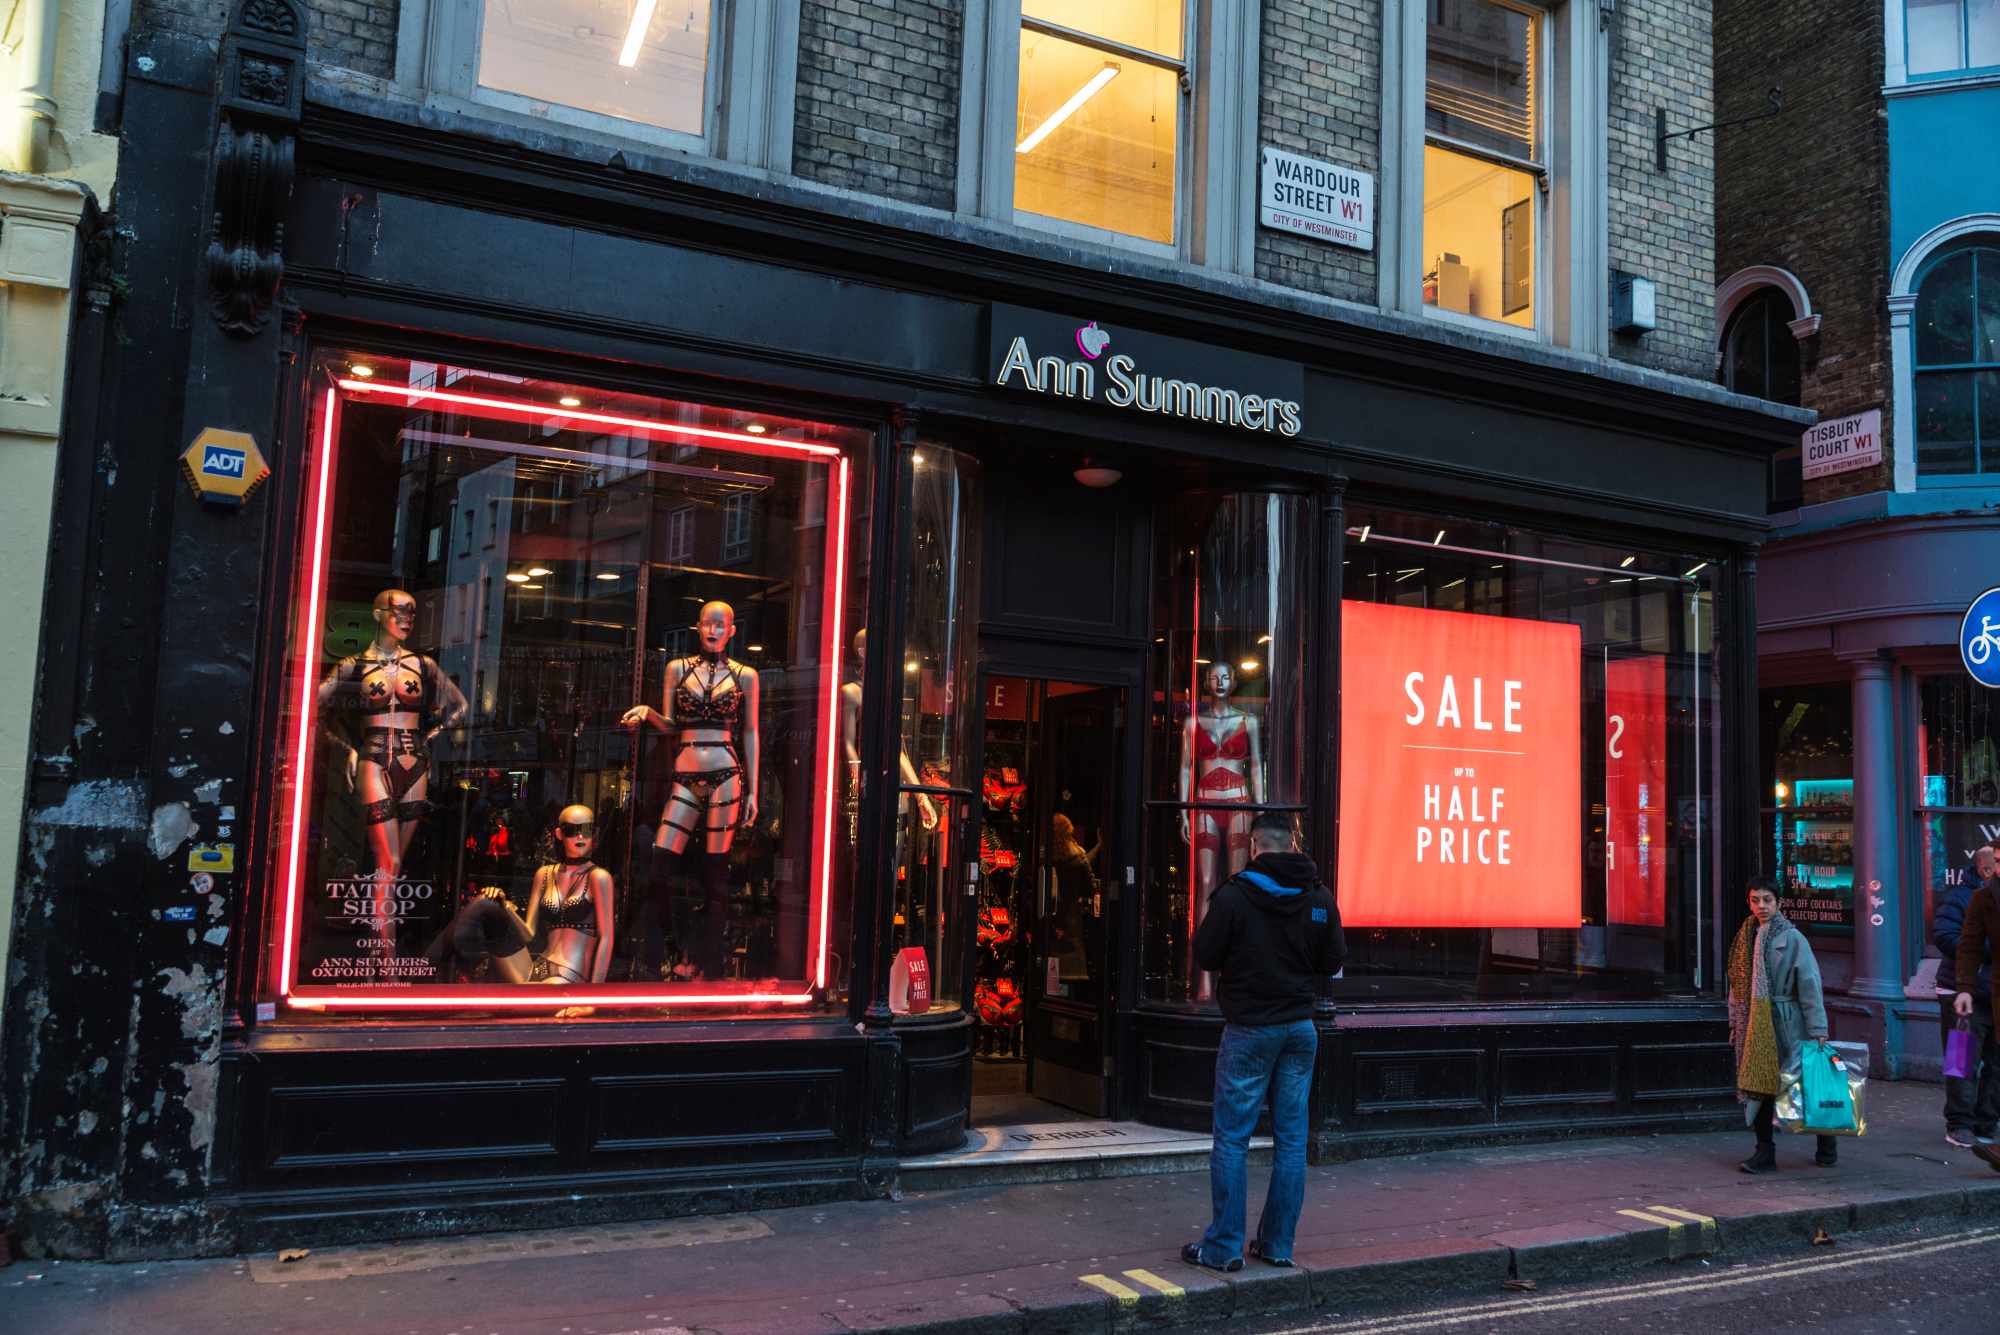 an ann summers shop with a sale sign in the window